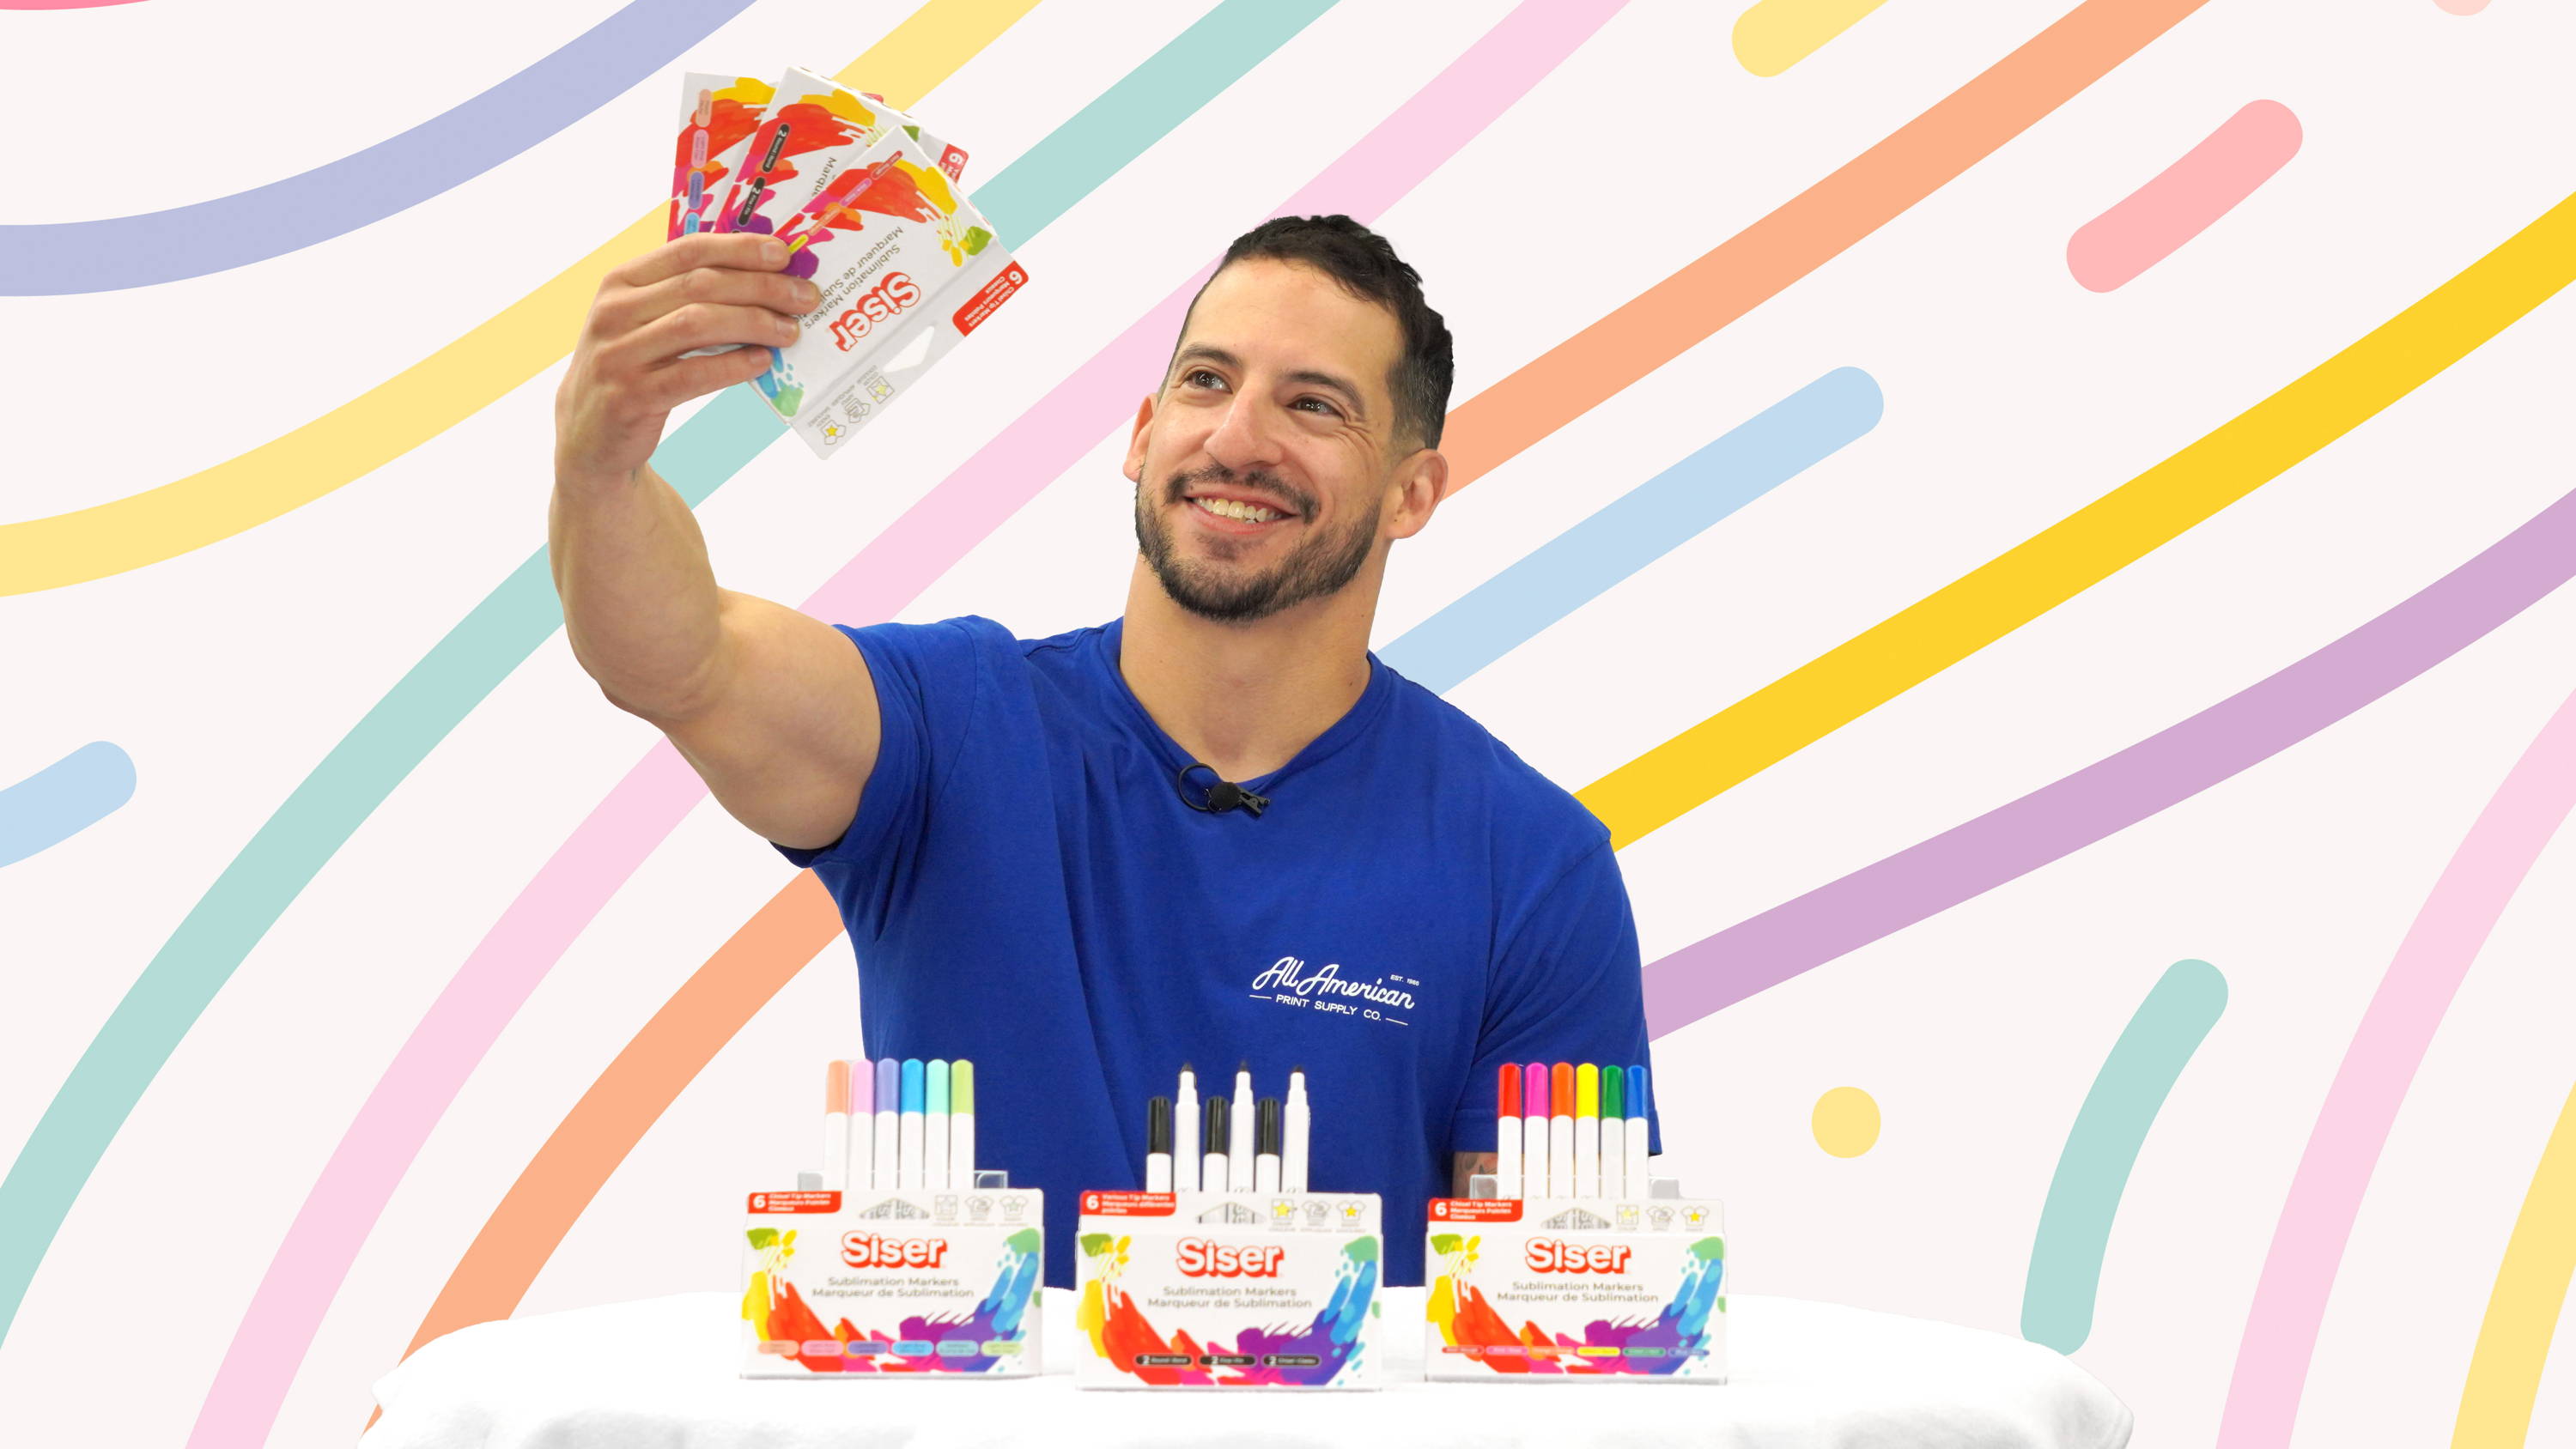 All American Print Supply Co's Estevan Romero holds up a pack of the all new Siser Sublimation Markers. Opened packs in front of him display the varying tip shapes, the primary color pack, and the pastel color pack. Graphic color strokes appear behind Estevan.